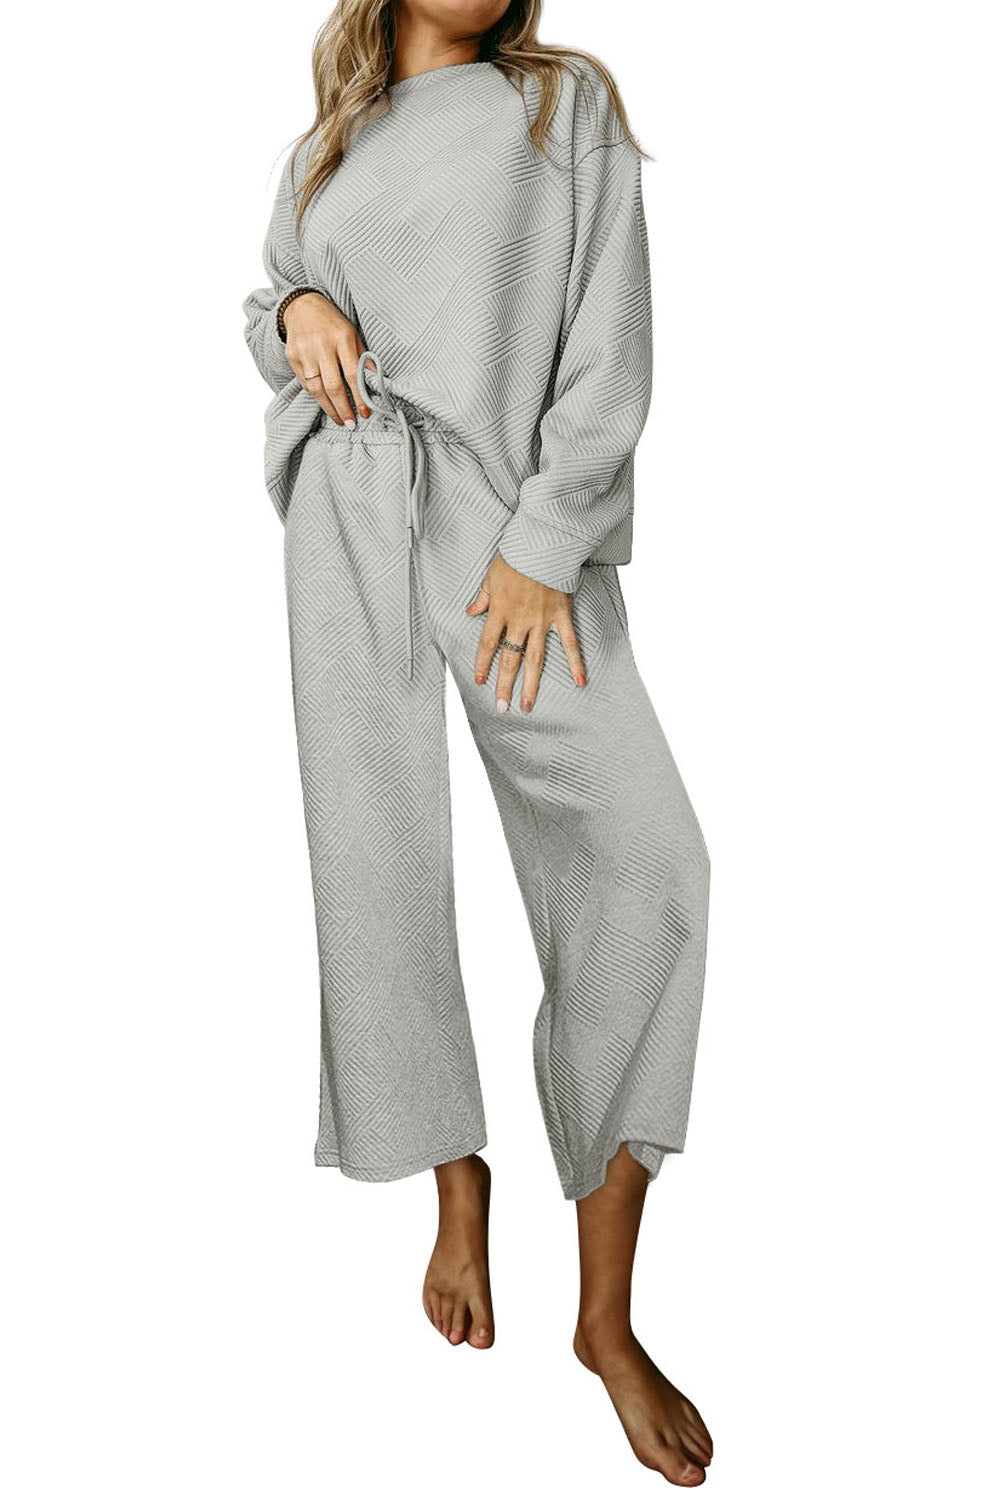 Cali Chic Gray Ultra Loose Textured 2pcs Slouchy Outfit